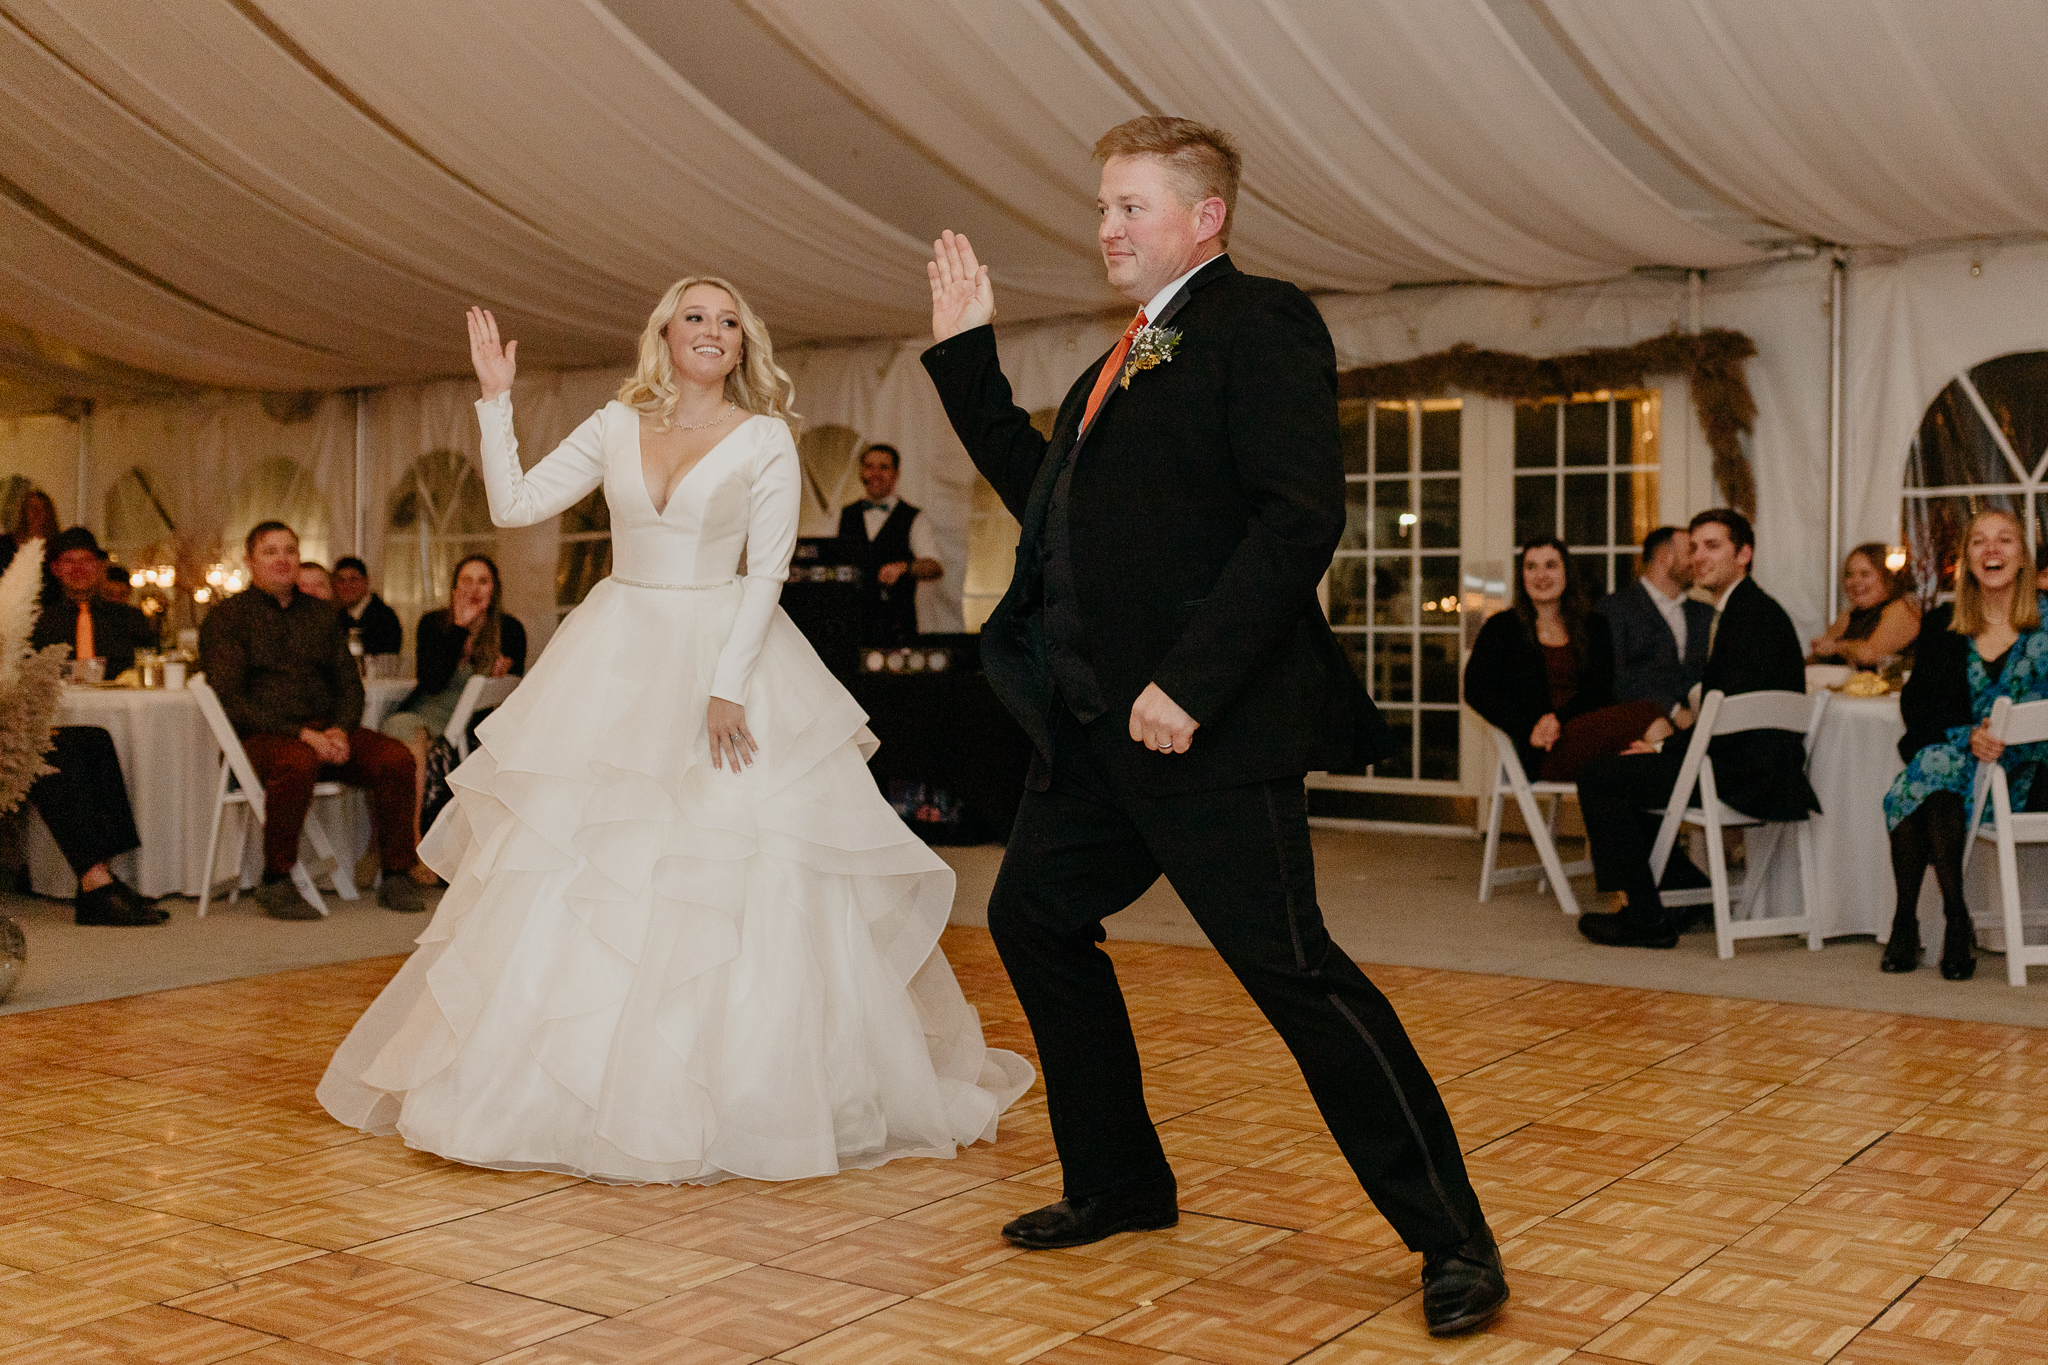 Bride and father dancing together during the father daughter dance, in a white tent wedding